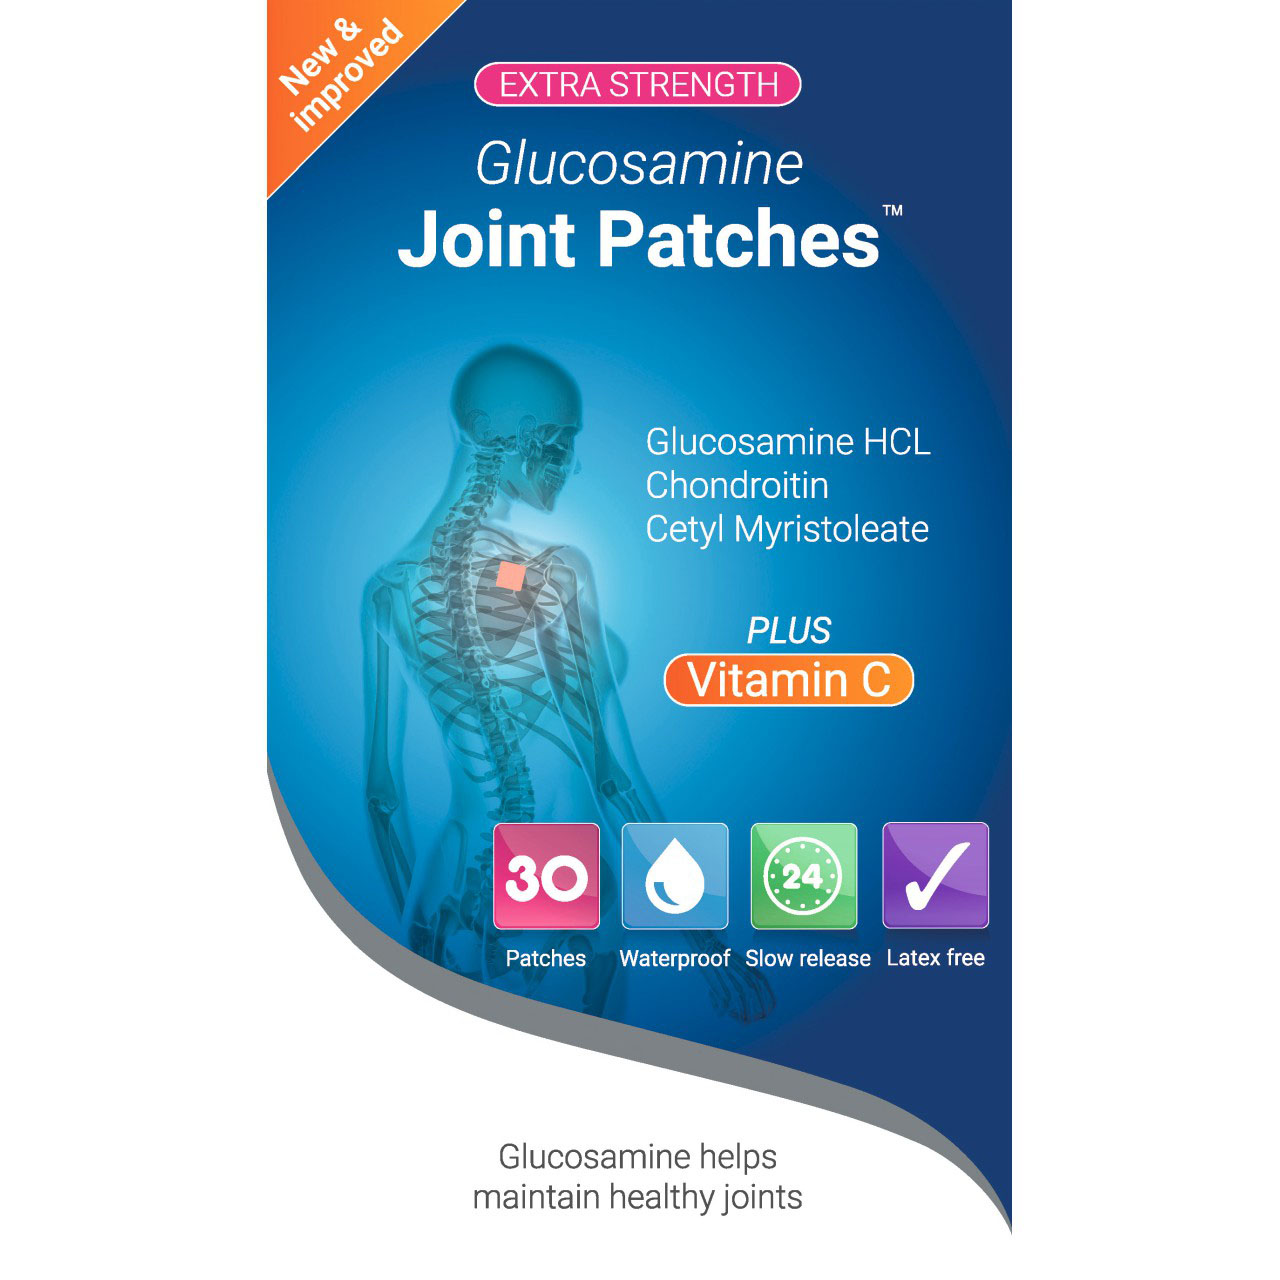 Glucosamine Joint Patches with Vitamin C